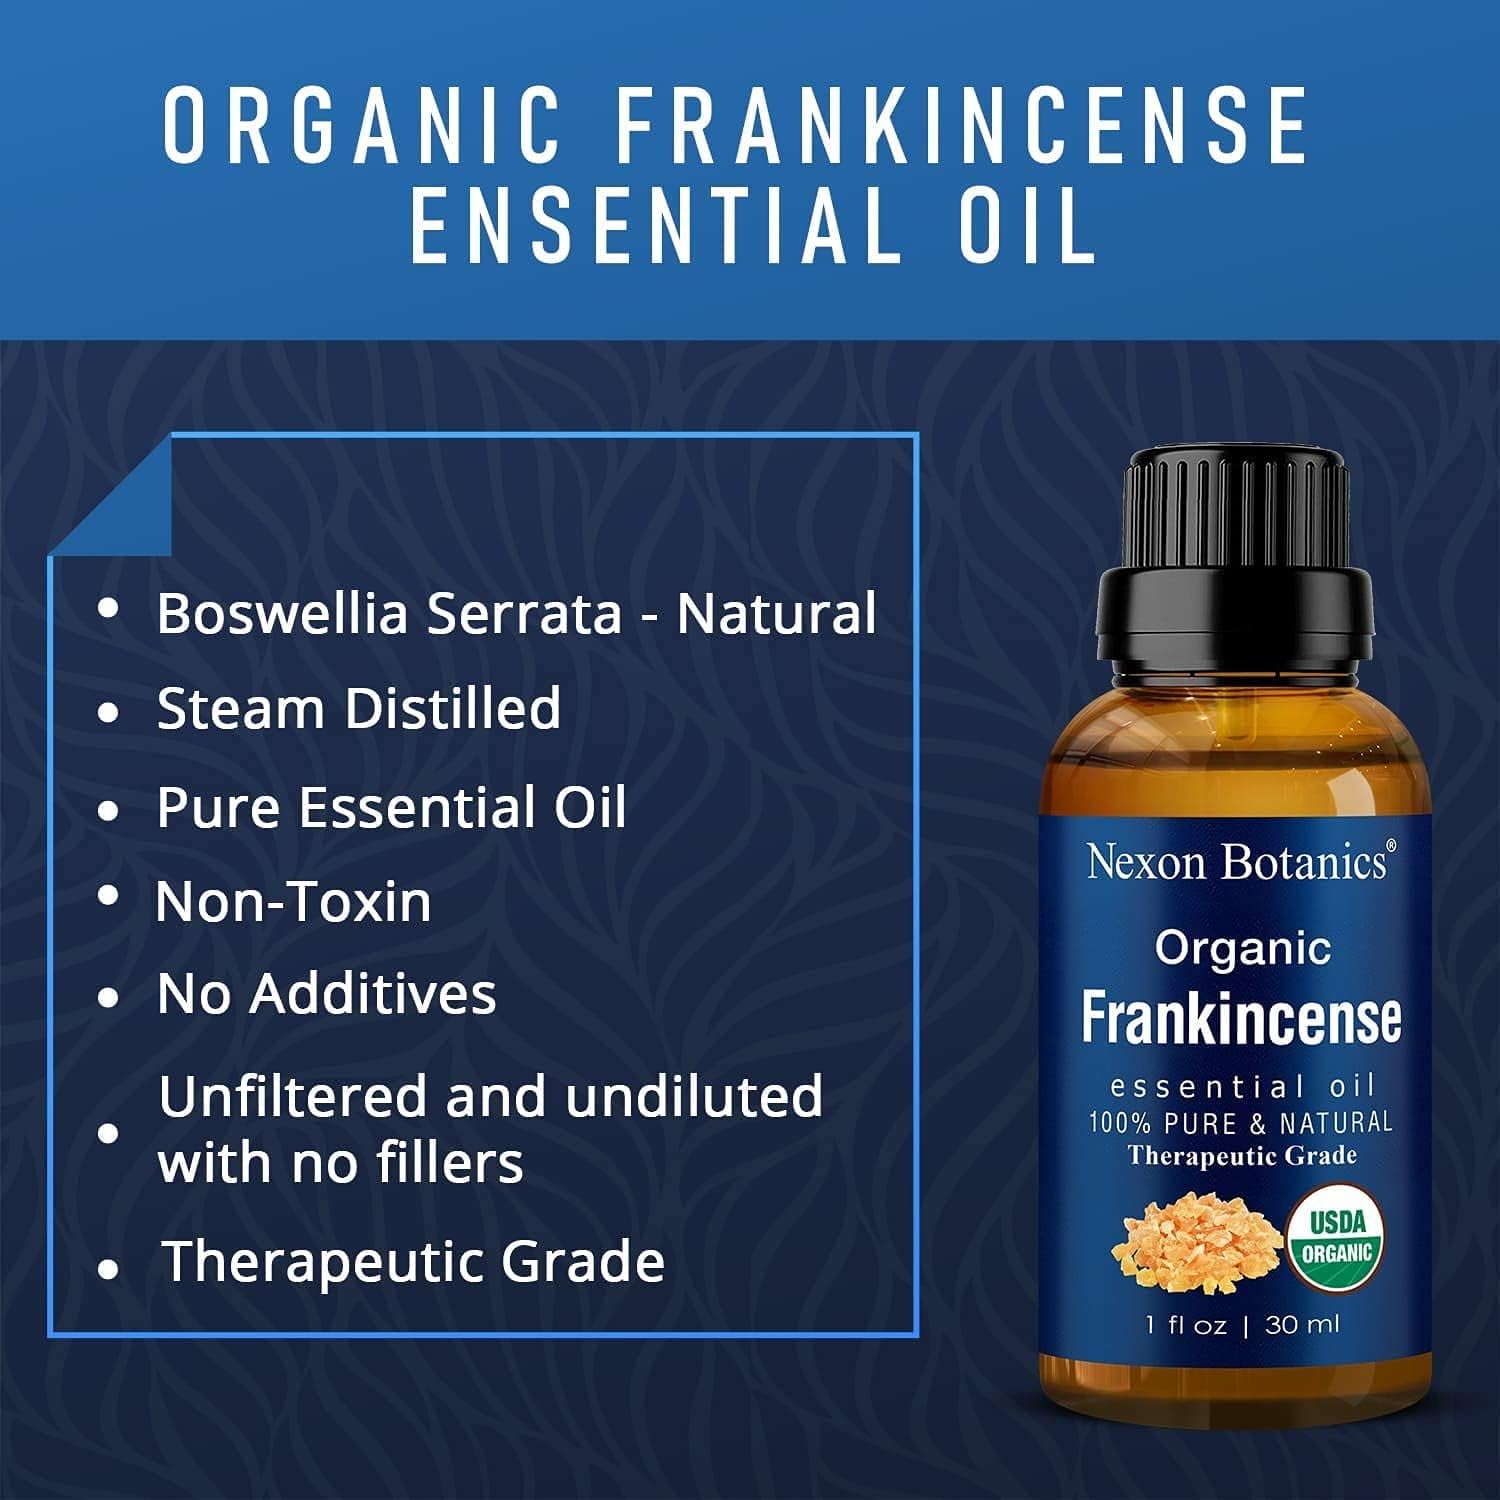 "Pure and Natural Organic Frankincense Essential Oil - Therapeutic Grade for Aromatherapy, Diffuser, and Skin & Hair Care - 30Ml"